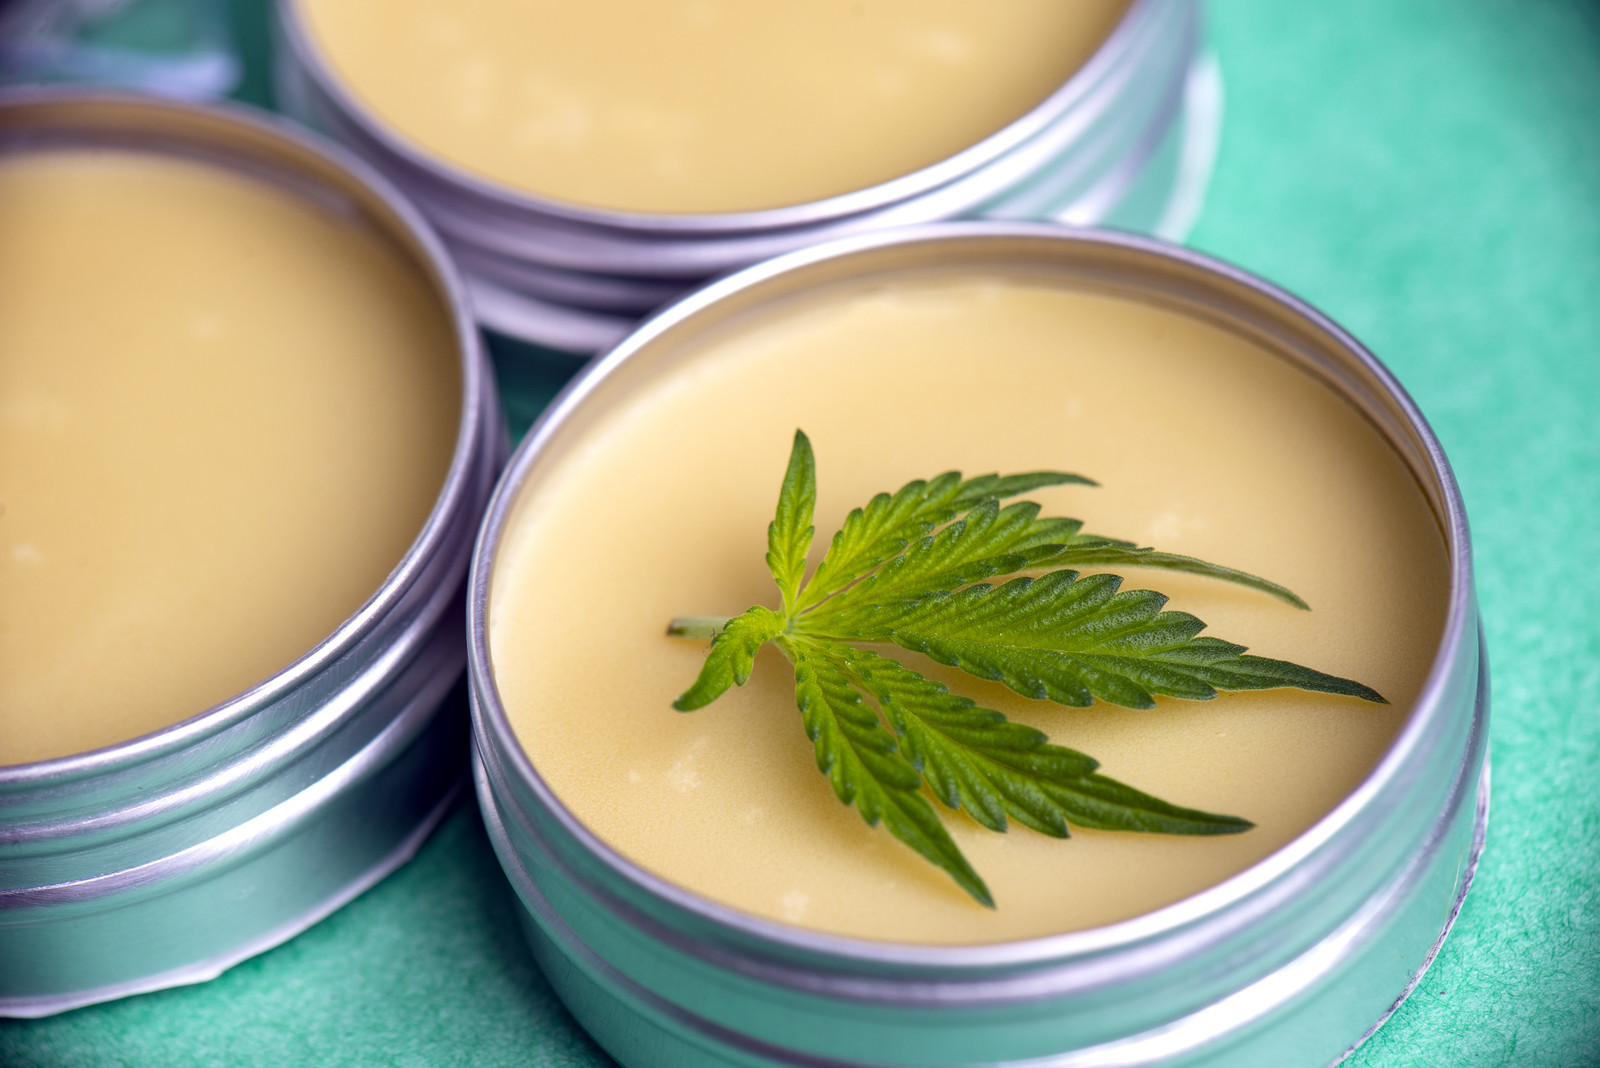 Cannabis topical lotions and oils